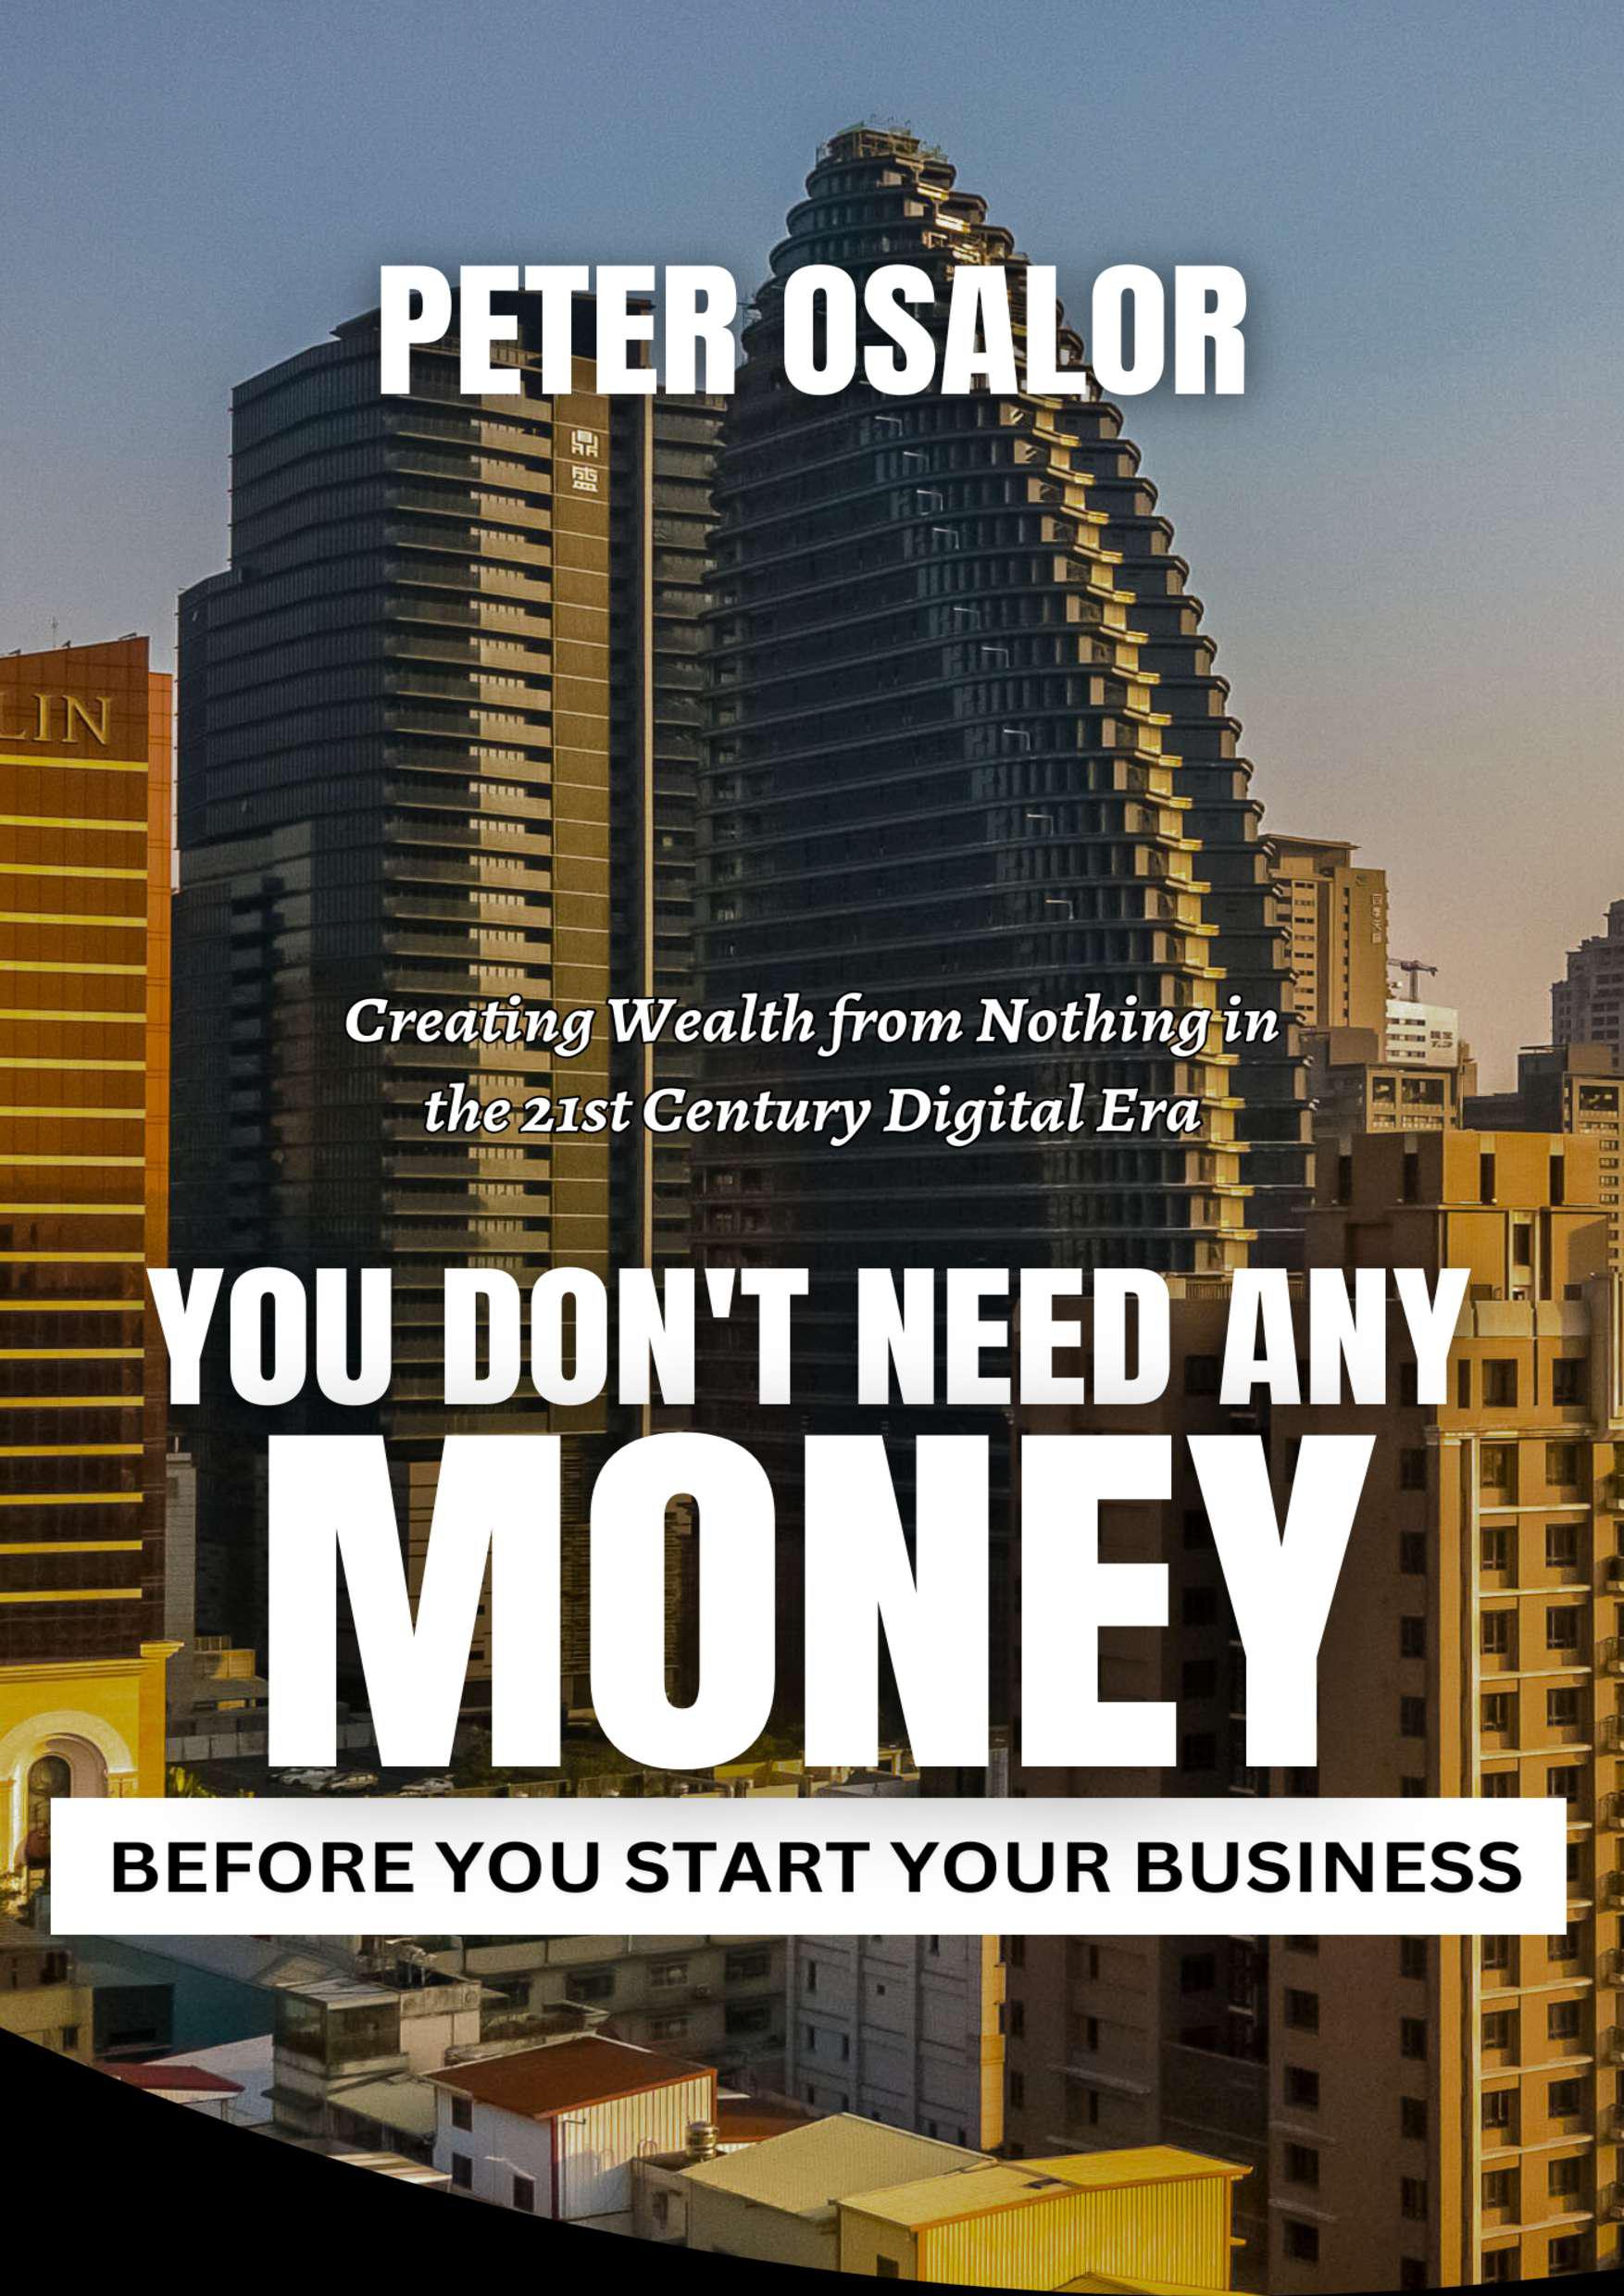 YOU DON’T NEED ANY MONEY BEFORE YOU START YOUR BUSINESS